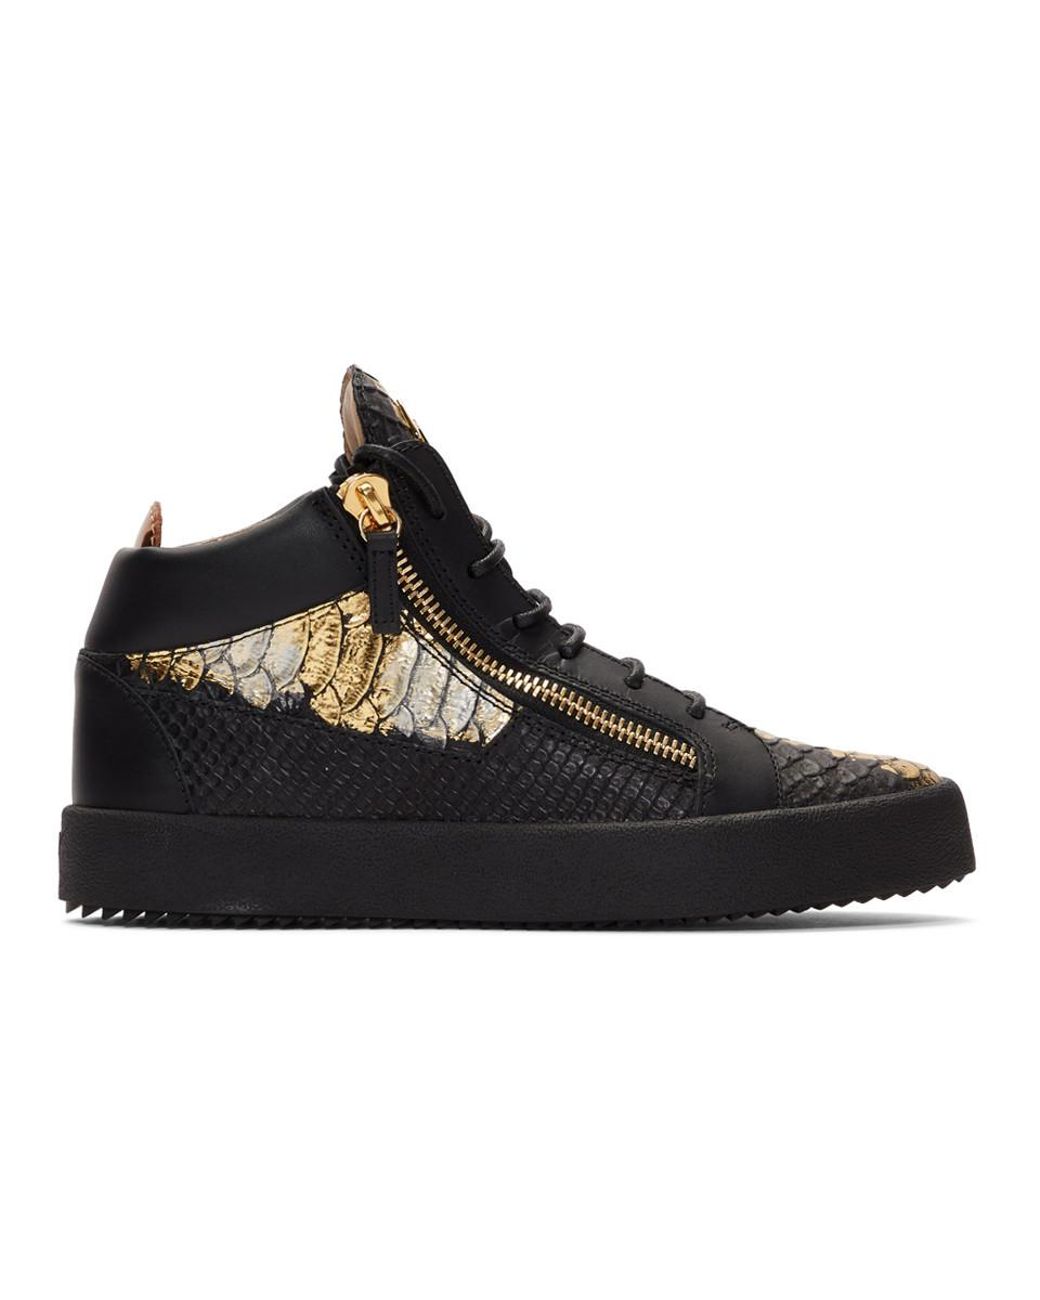 Giuseppe Zanotti Black And Gold Croc Kriss High-top Sneakers for Men ...